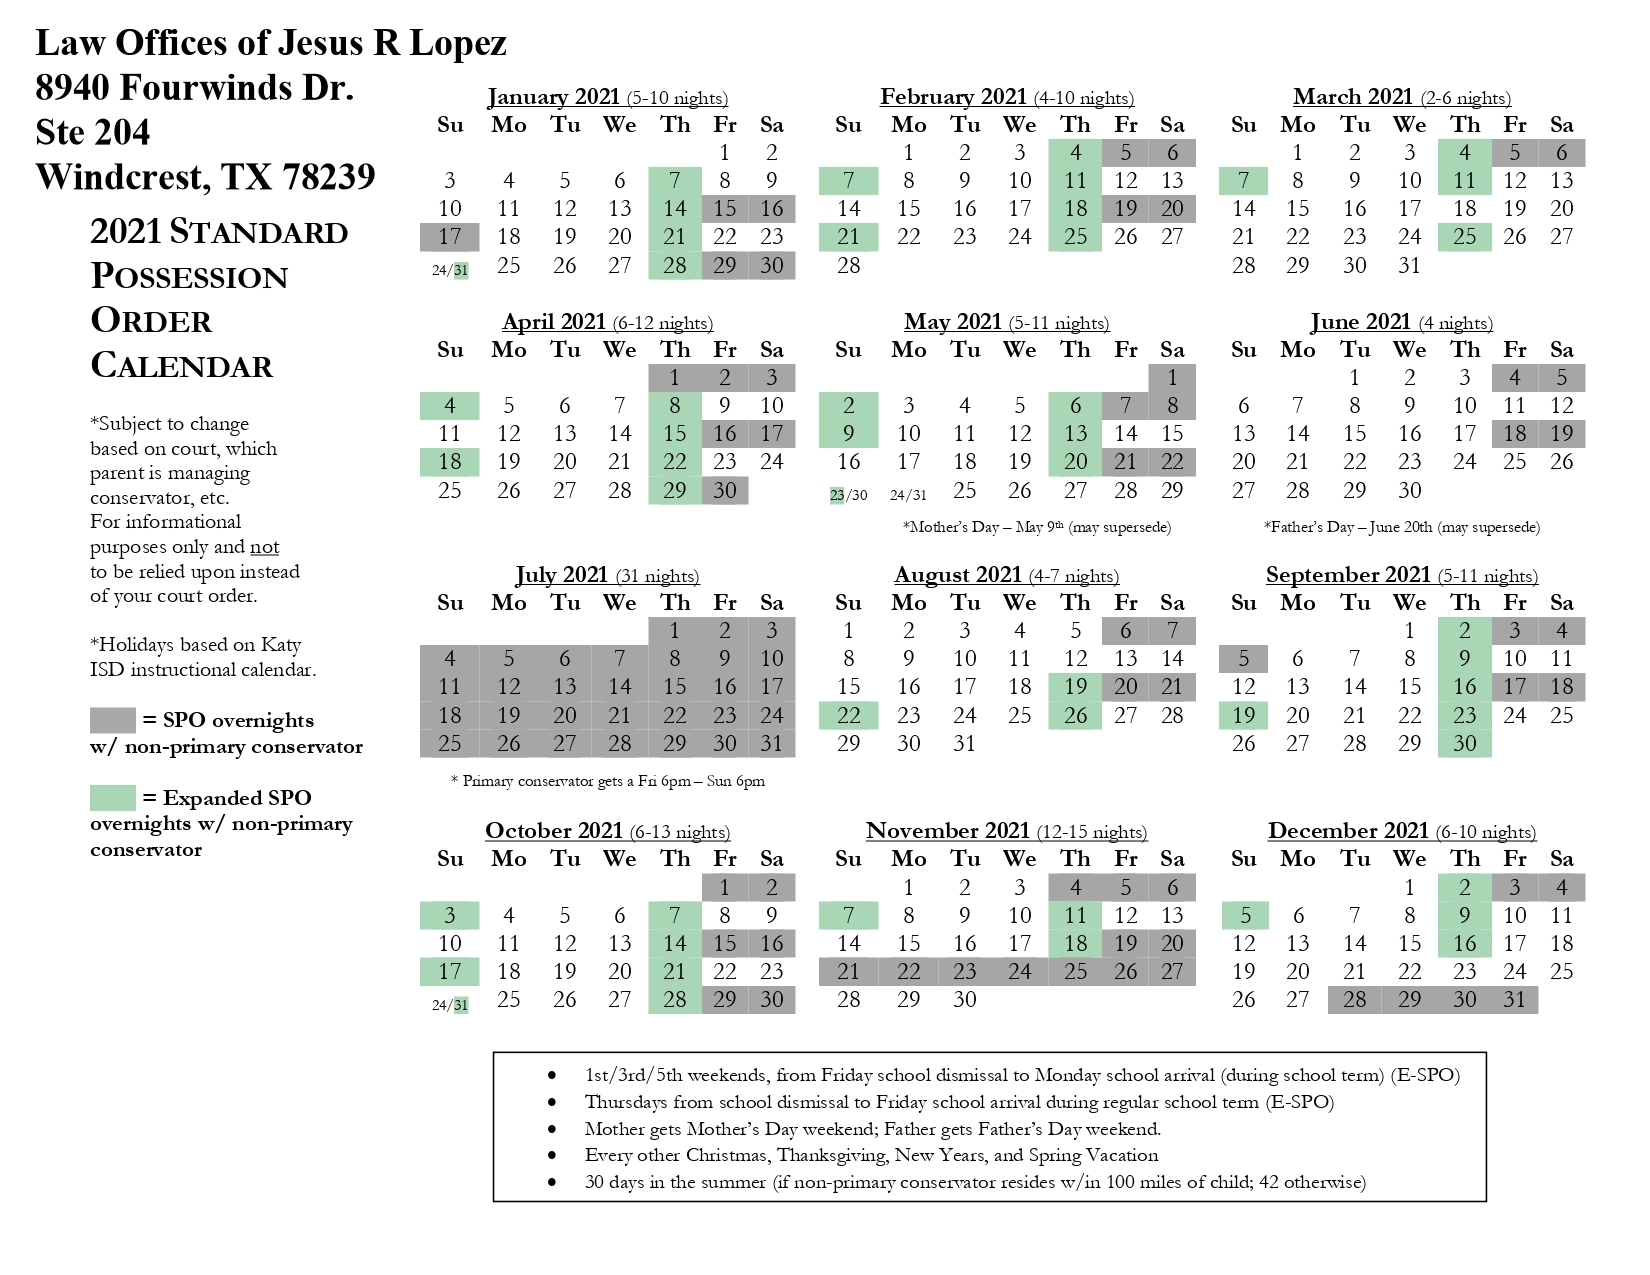 1st 3rd And 5th Weekend Calendar 2022 2021-Hlf-Standard-Possession-Order-Calendar (1)_Page-0001 | Law Offices Of  Jesus R. Lopez